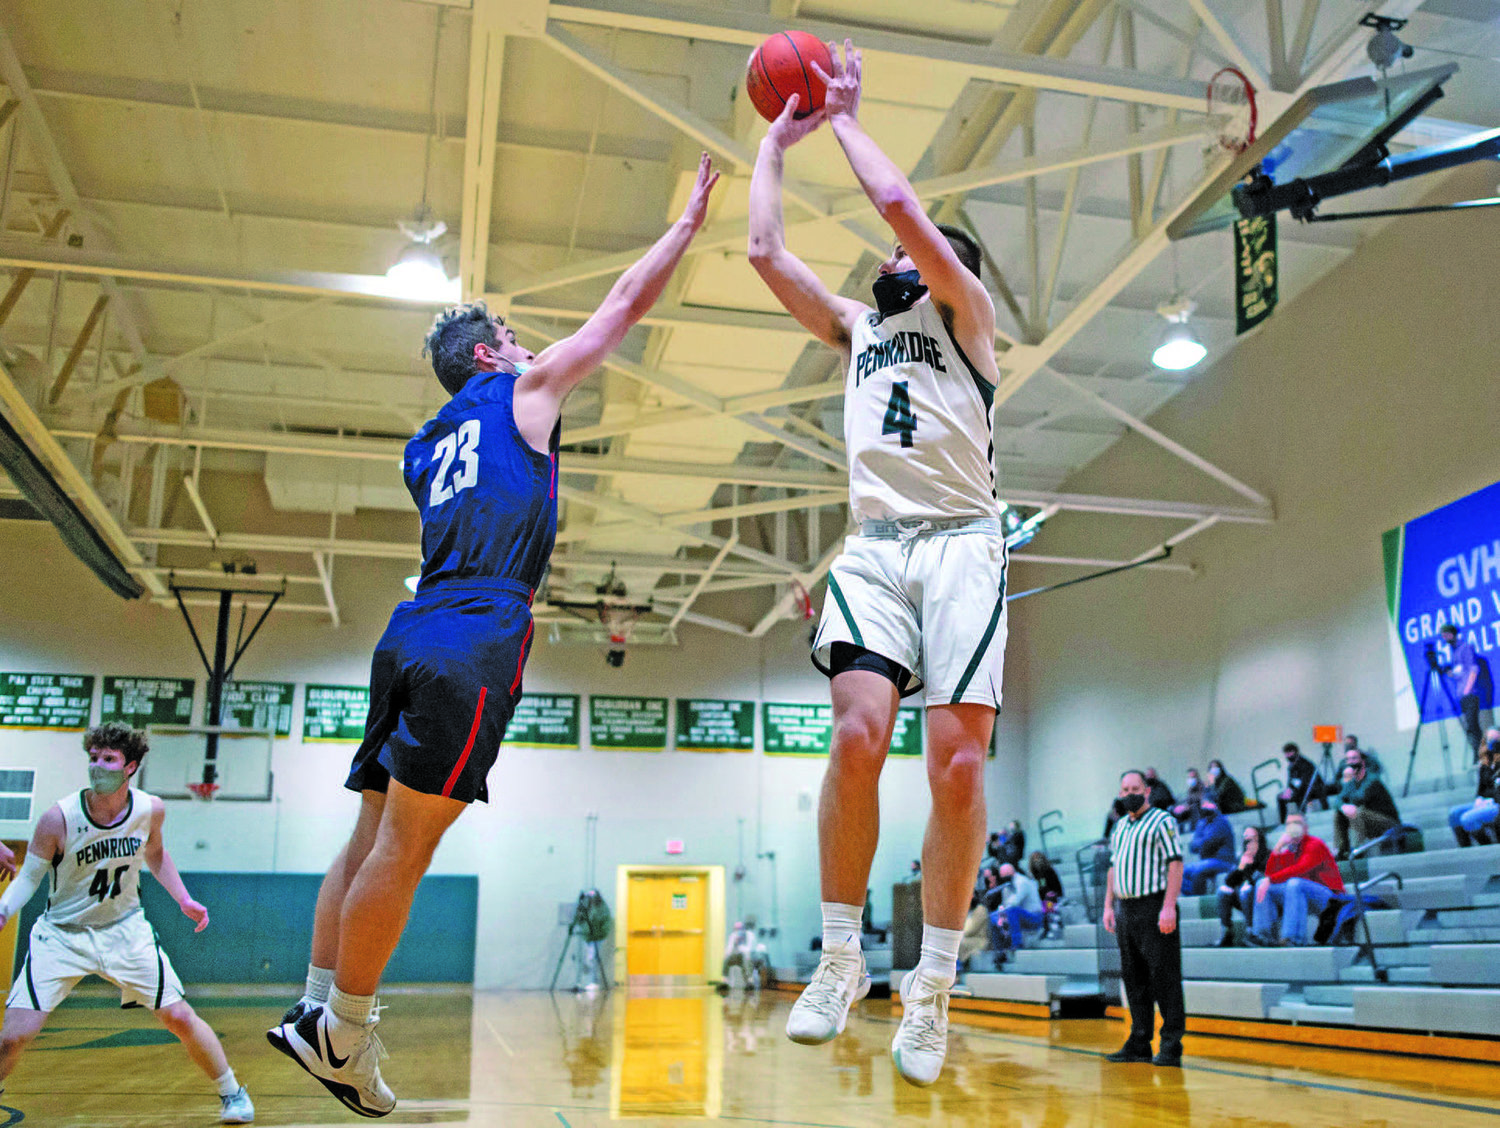 Pennridge’s Luke Yoder gets a shot off against CB East’s Joe Jackman during a Jan. 12 contest between the Patriots and Rams in Perkasie. CB East defeated Pennridge 62-48. After a month’s delay, the winter sports season is finally underway in Bucks County.